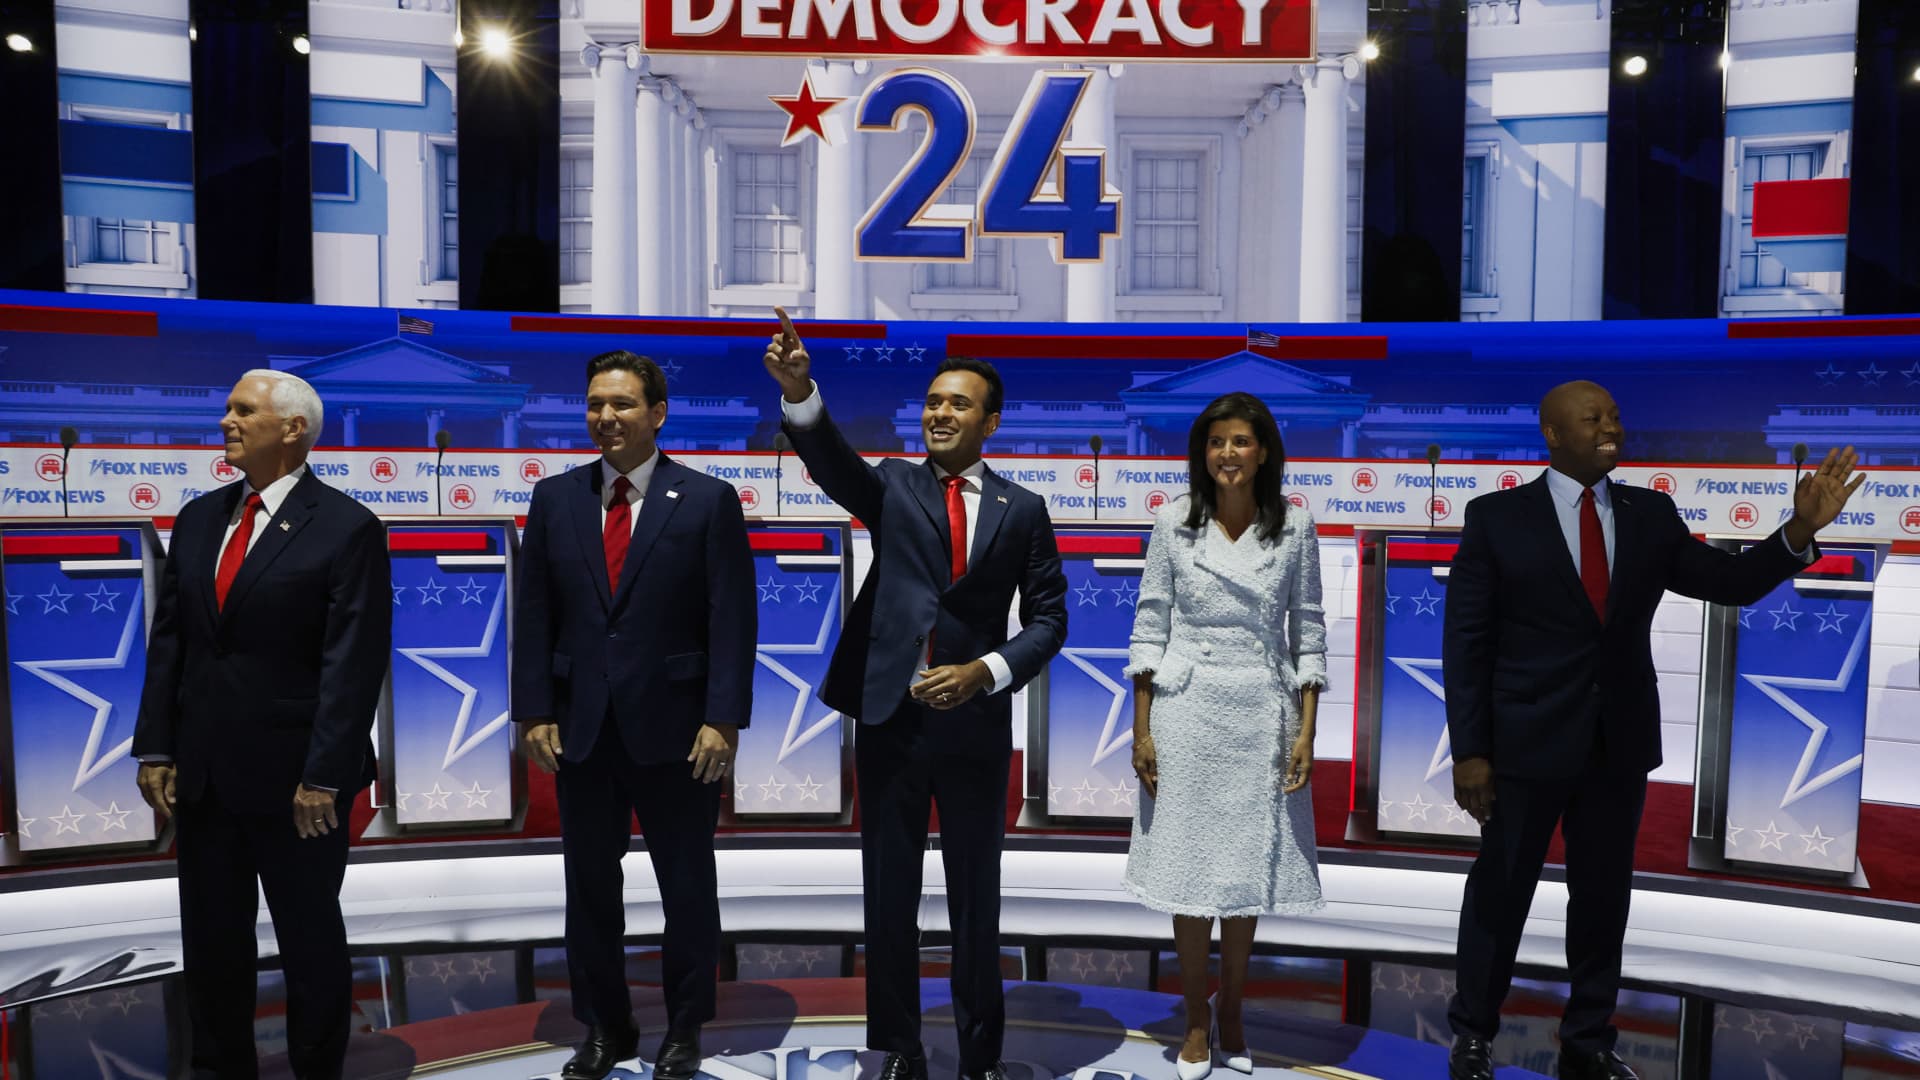 Second Republican primary debate had the lowest TV viewership since 2015